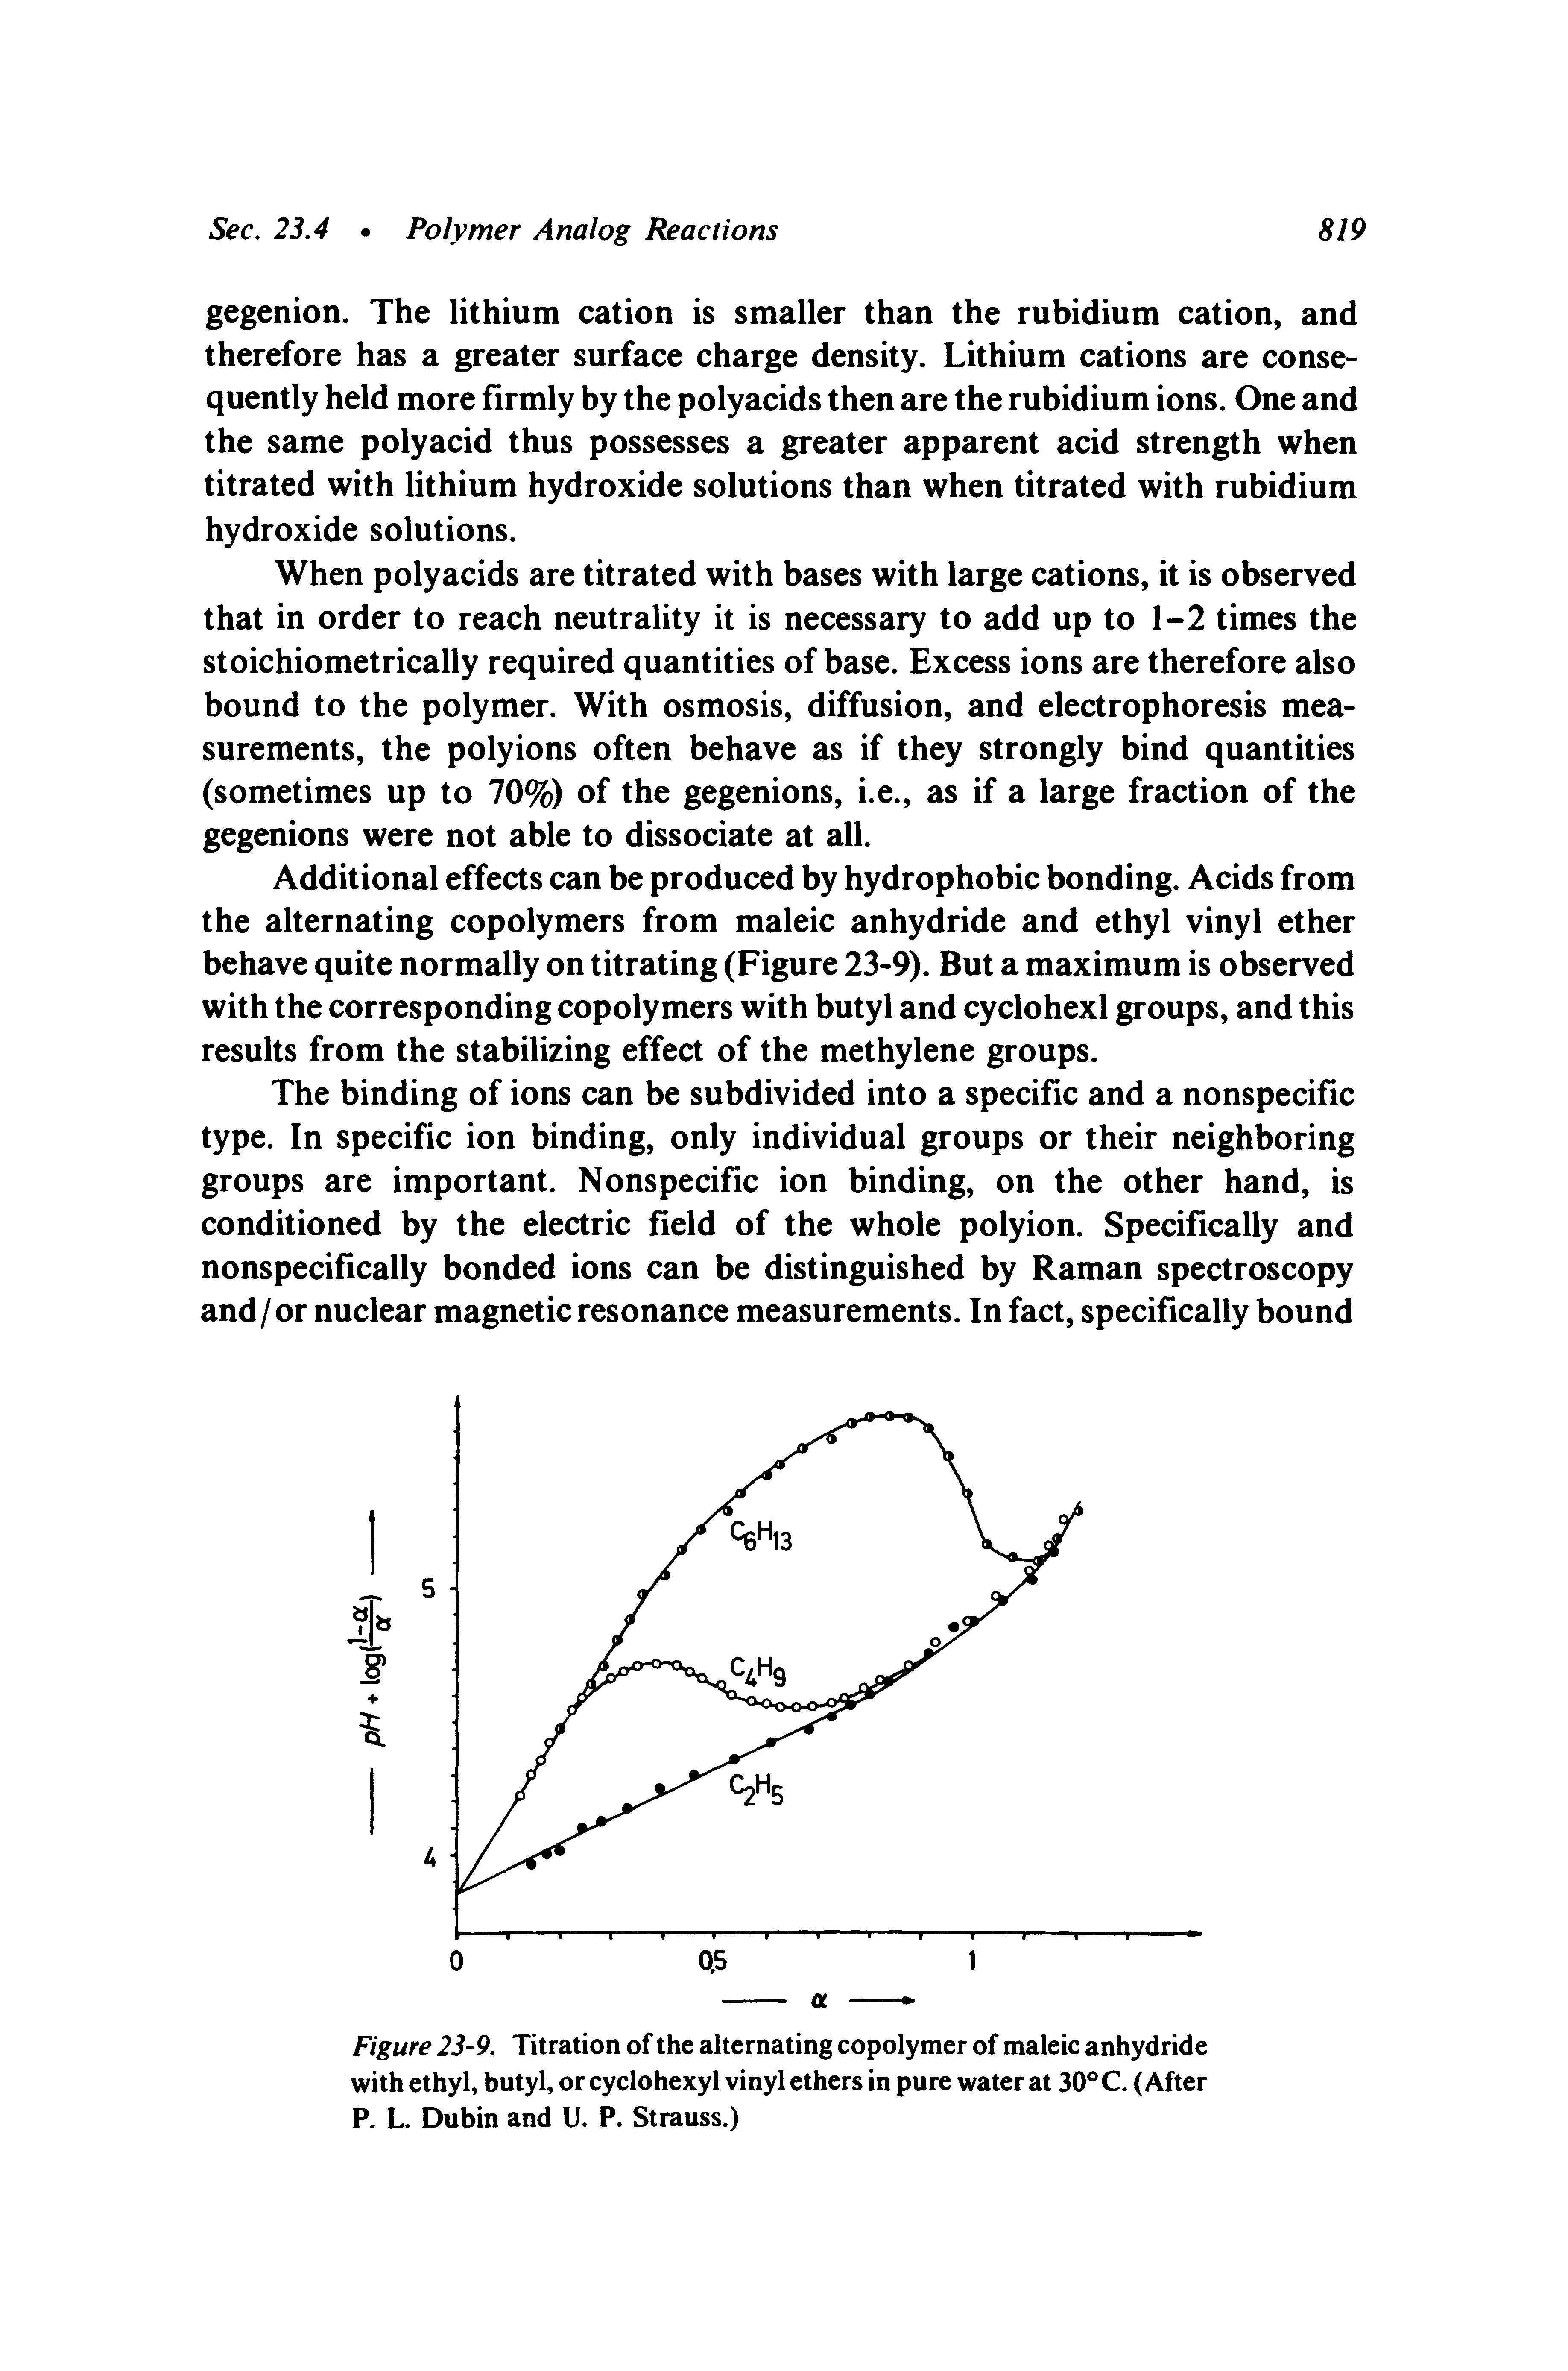 Figure 23-9. Titration of the alternating copolymer of maleic anhydride with ethyl, butyl, or cyclohexyl vinyl ethers in pure water at 30 C. (After P. L. Dubin and U. P. Strauss.)...